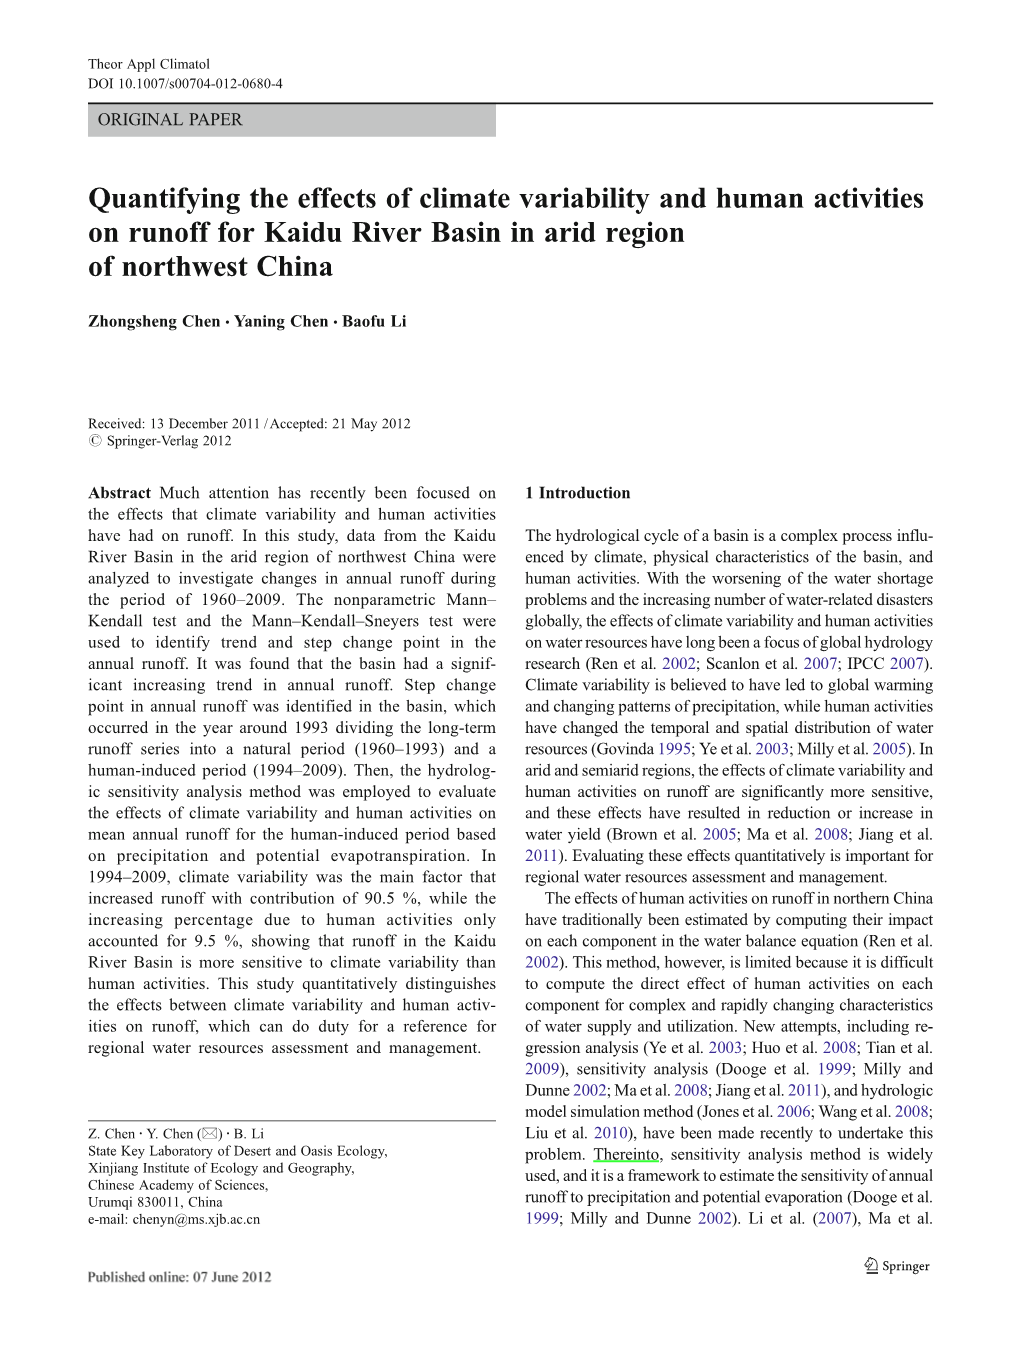 Quantifying the Effects of Climate Variability and Human Activities on Runoff for Kaidu River Basin in Arid Region of Northwest China